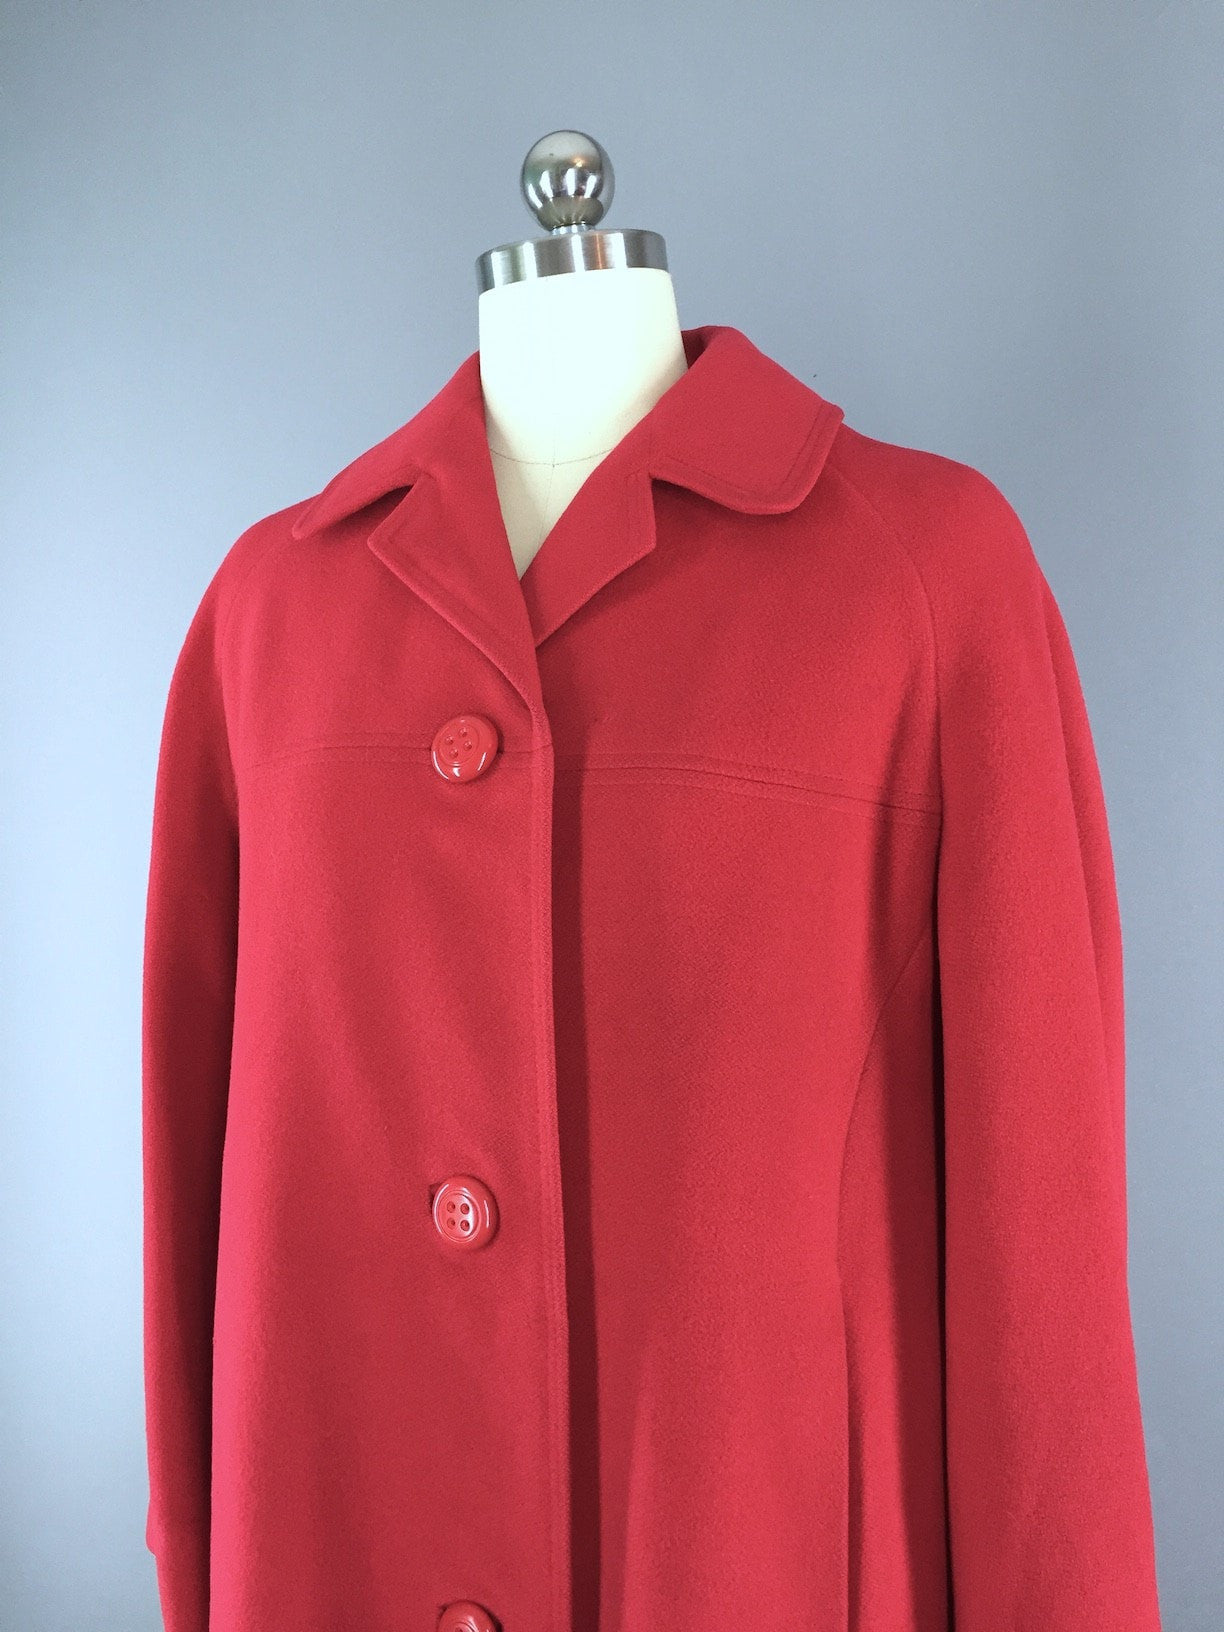 Vintage Cashmere Coat / Rose Red - ThisBlueBird